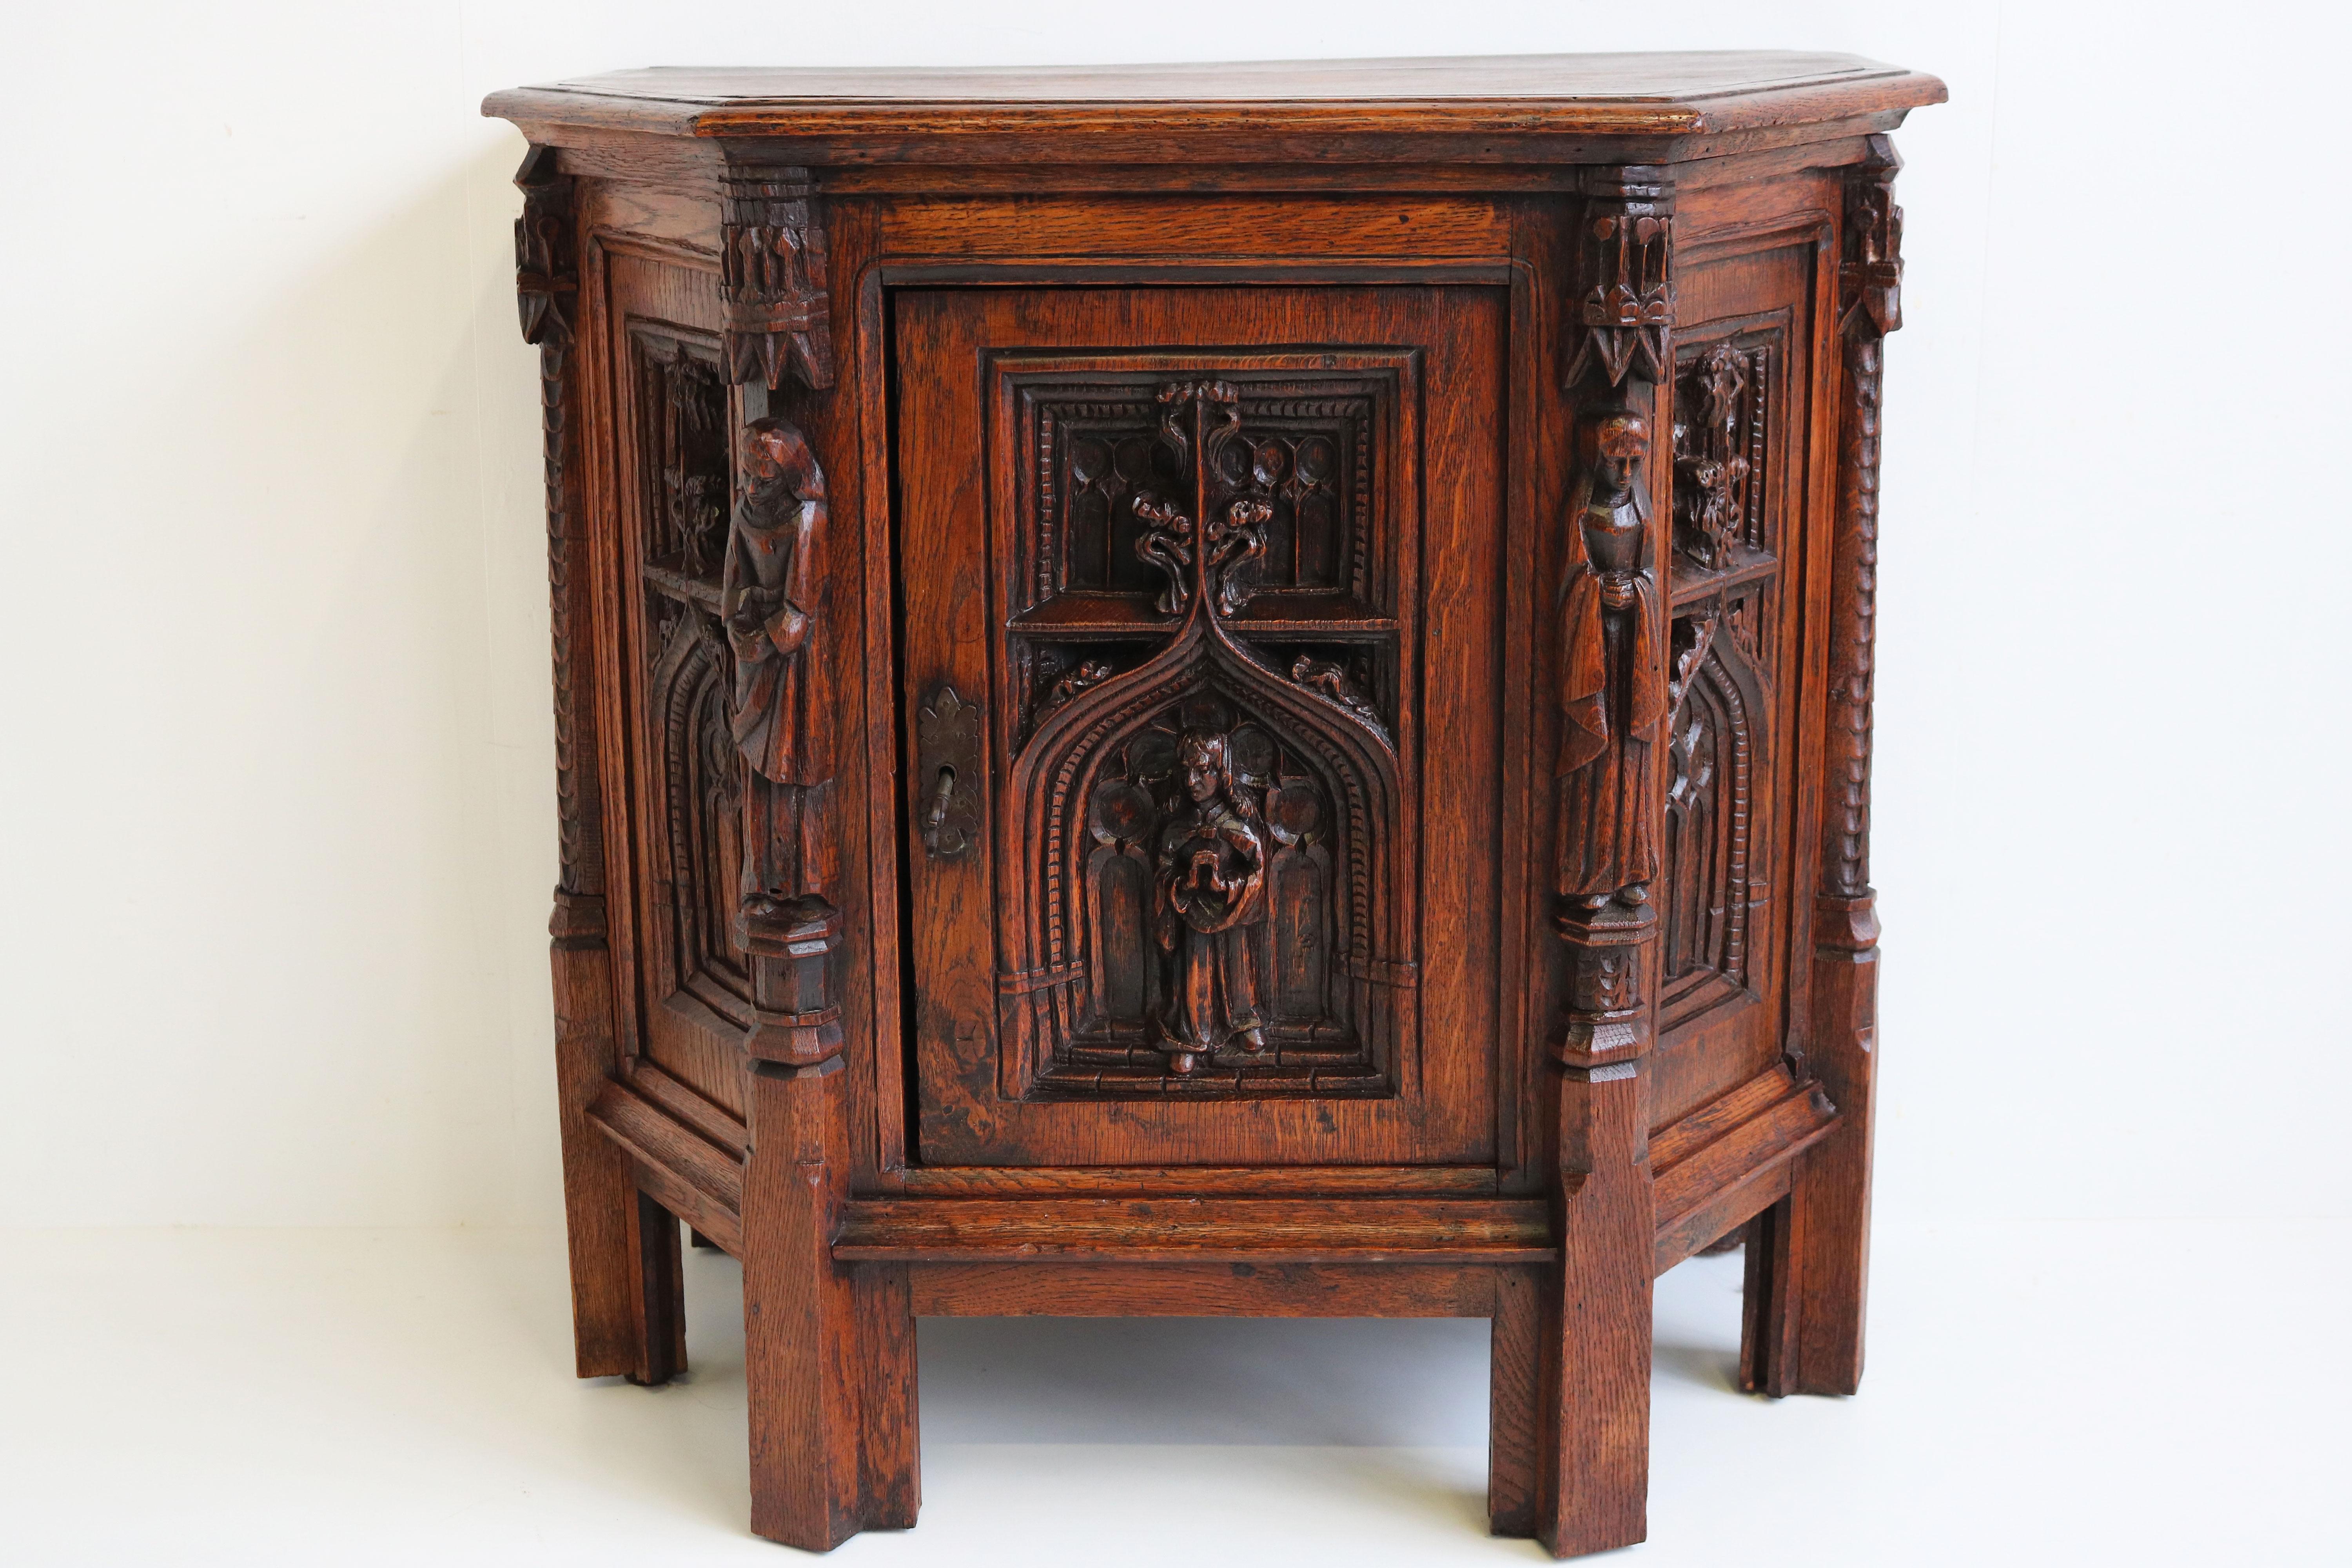 Small Antique Gothic Revival Hexagonal Cabinet 19th Century French Oak Figures 11